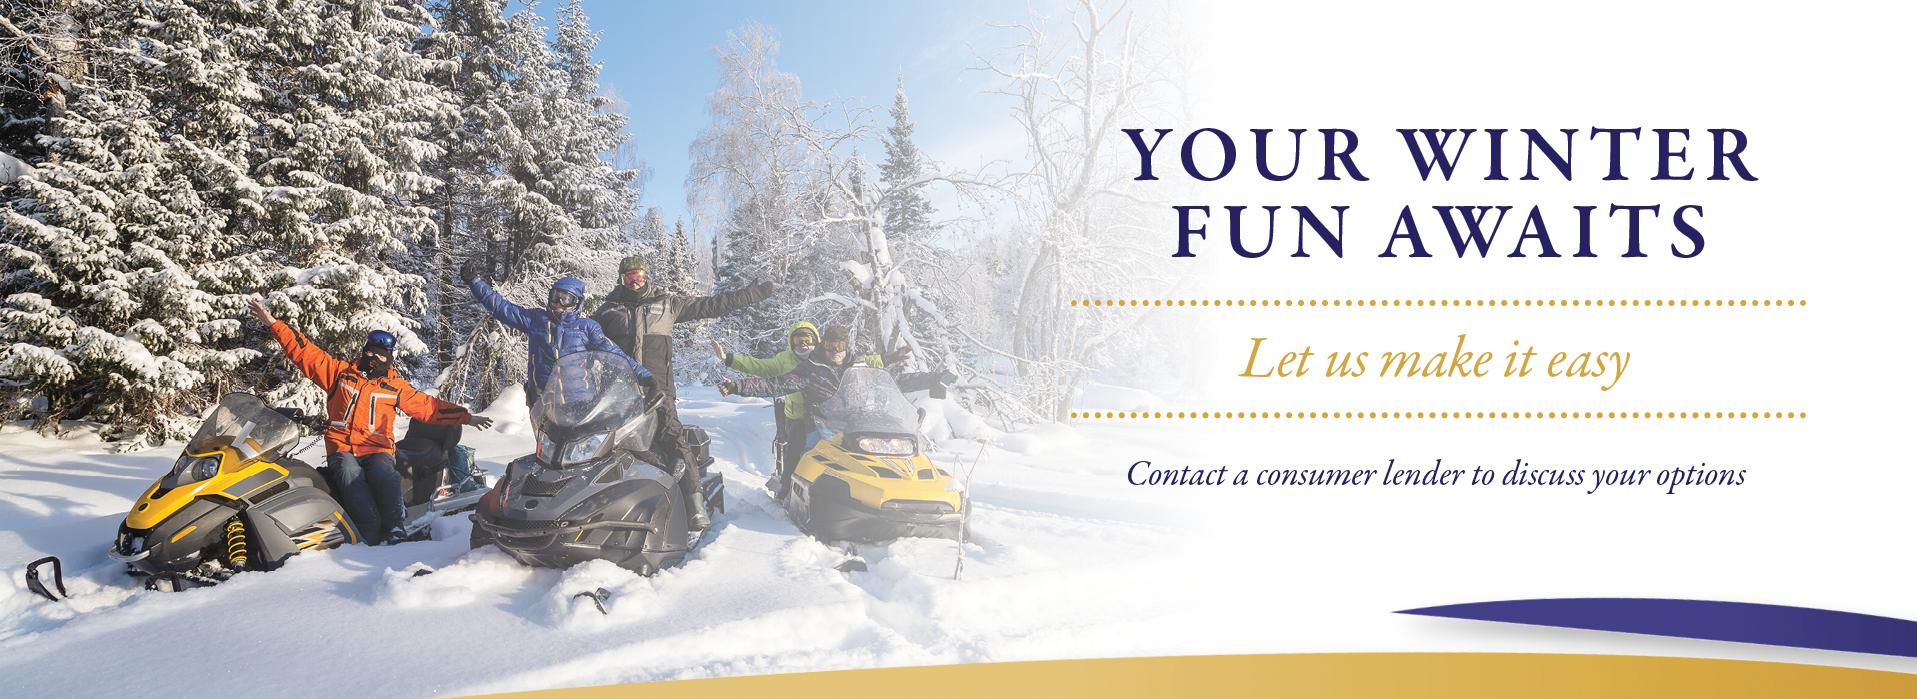 Your Winter Fun Awaits.  Let us make it easy.  Contact a consumer lender to discuss your options with image of snowmobilers in front of  snow covered pine trees